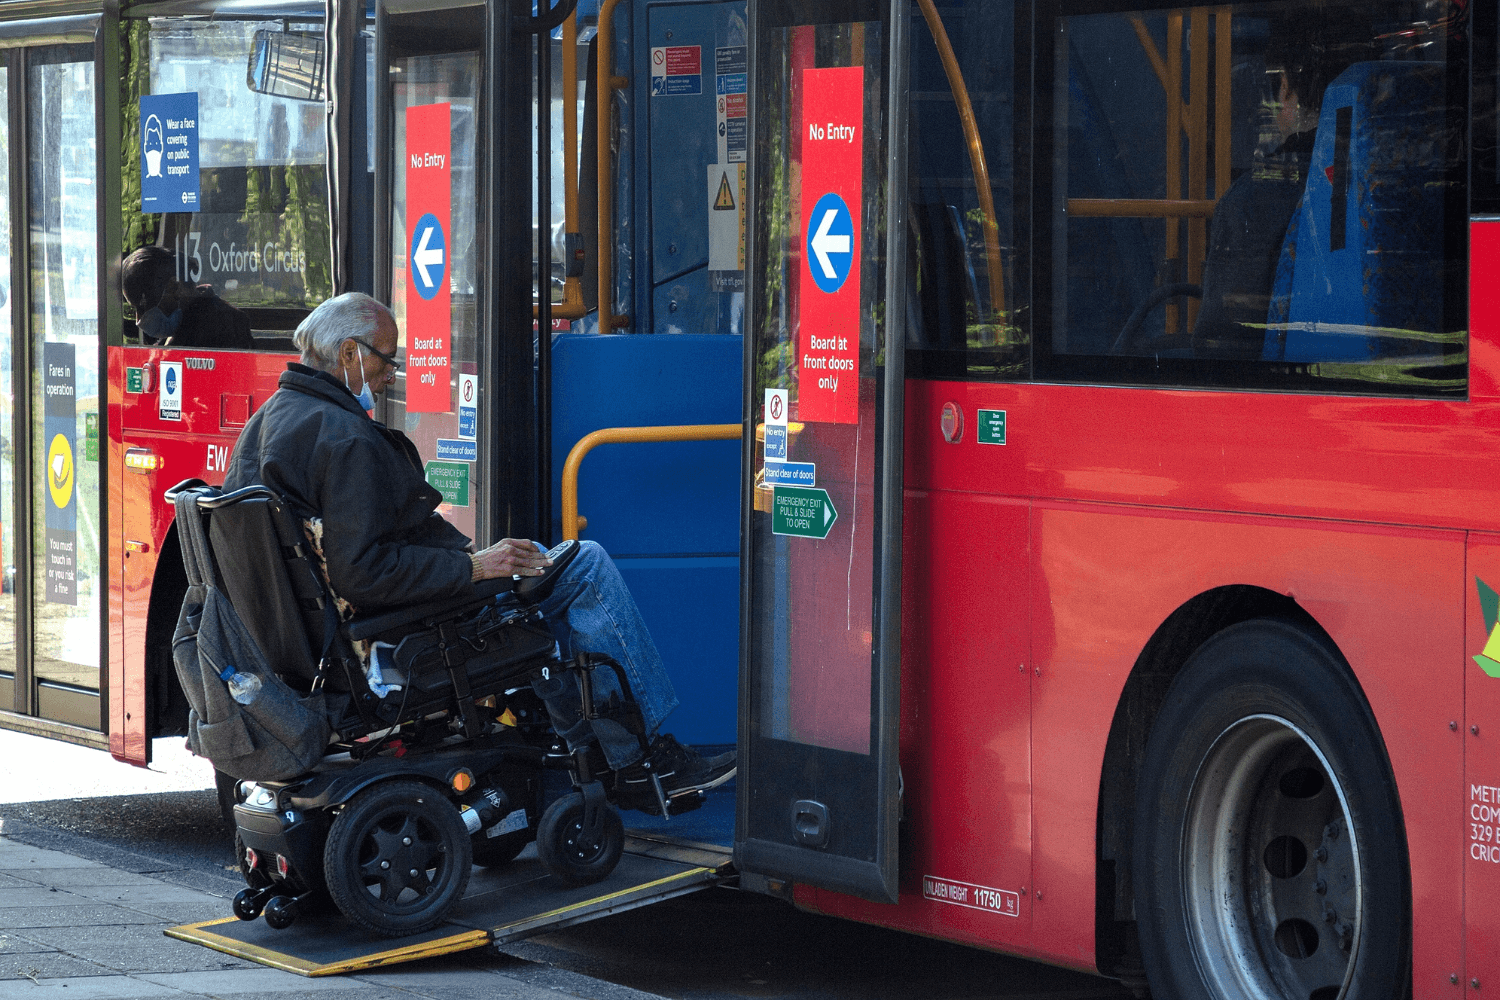 Disabled individual entering bus on ramp